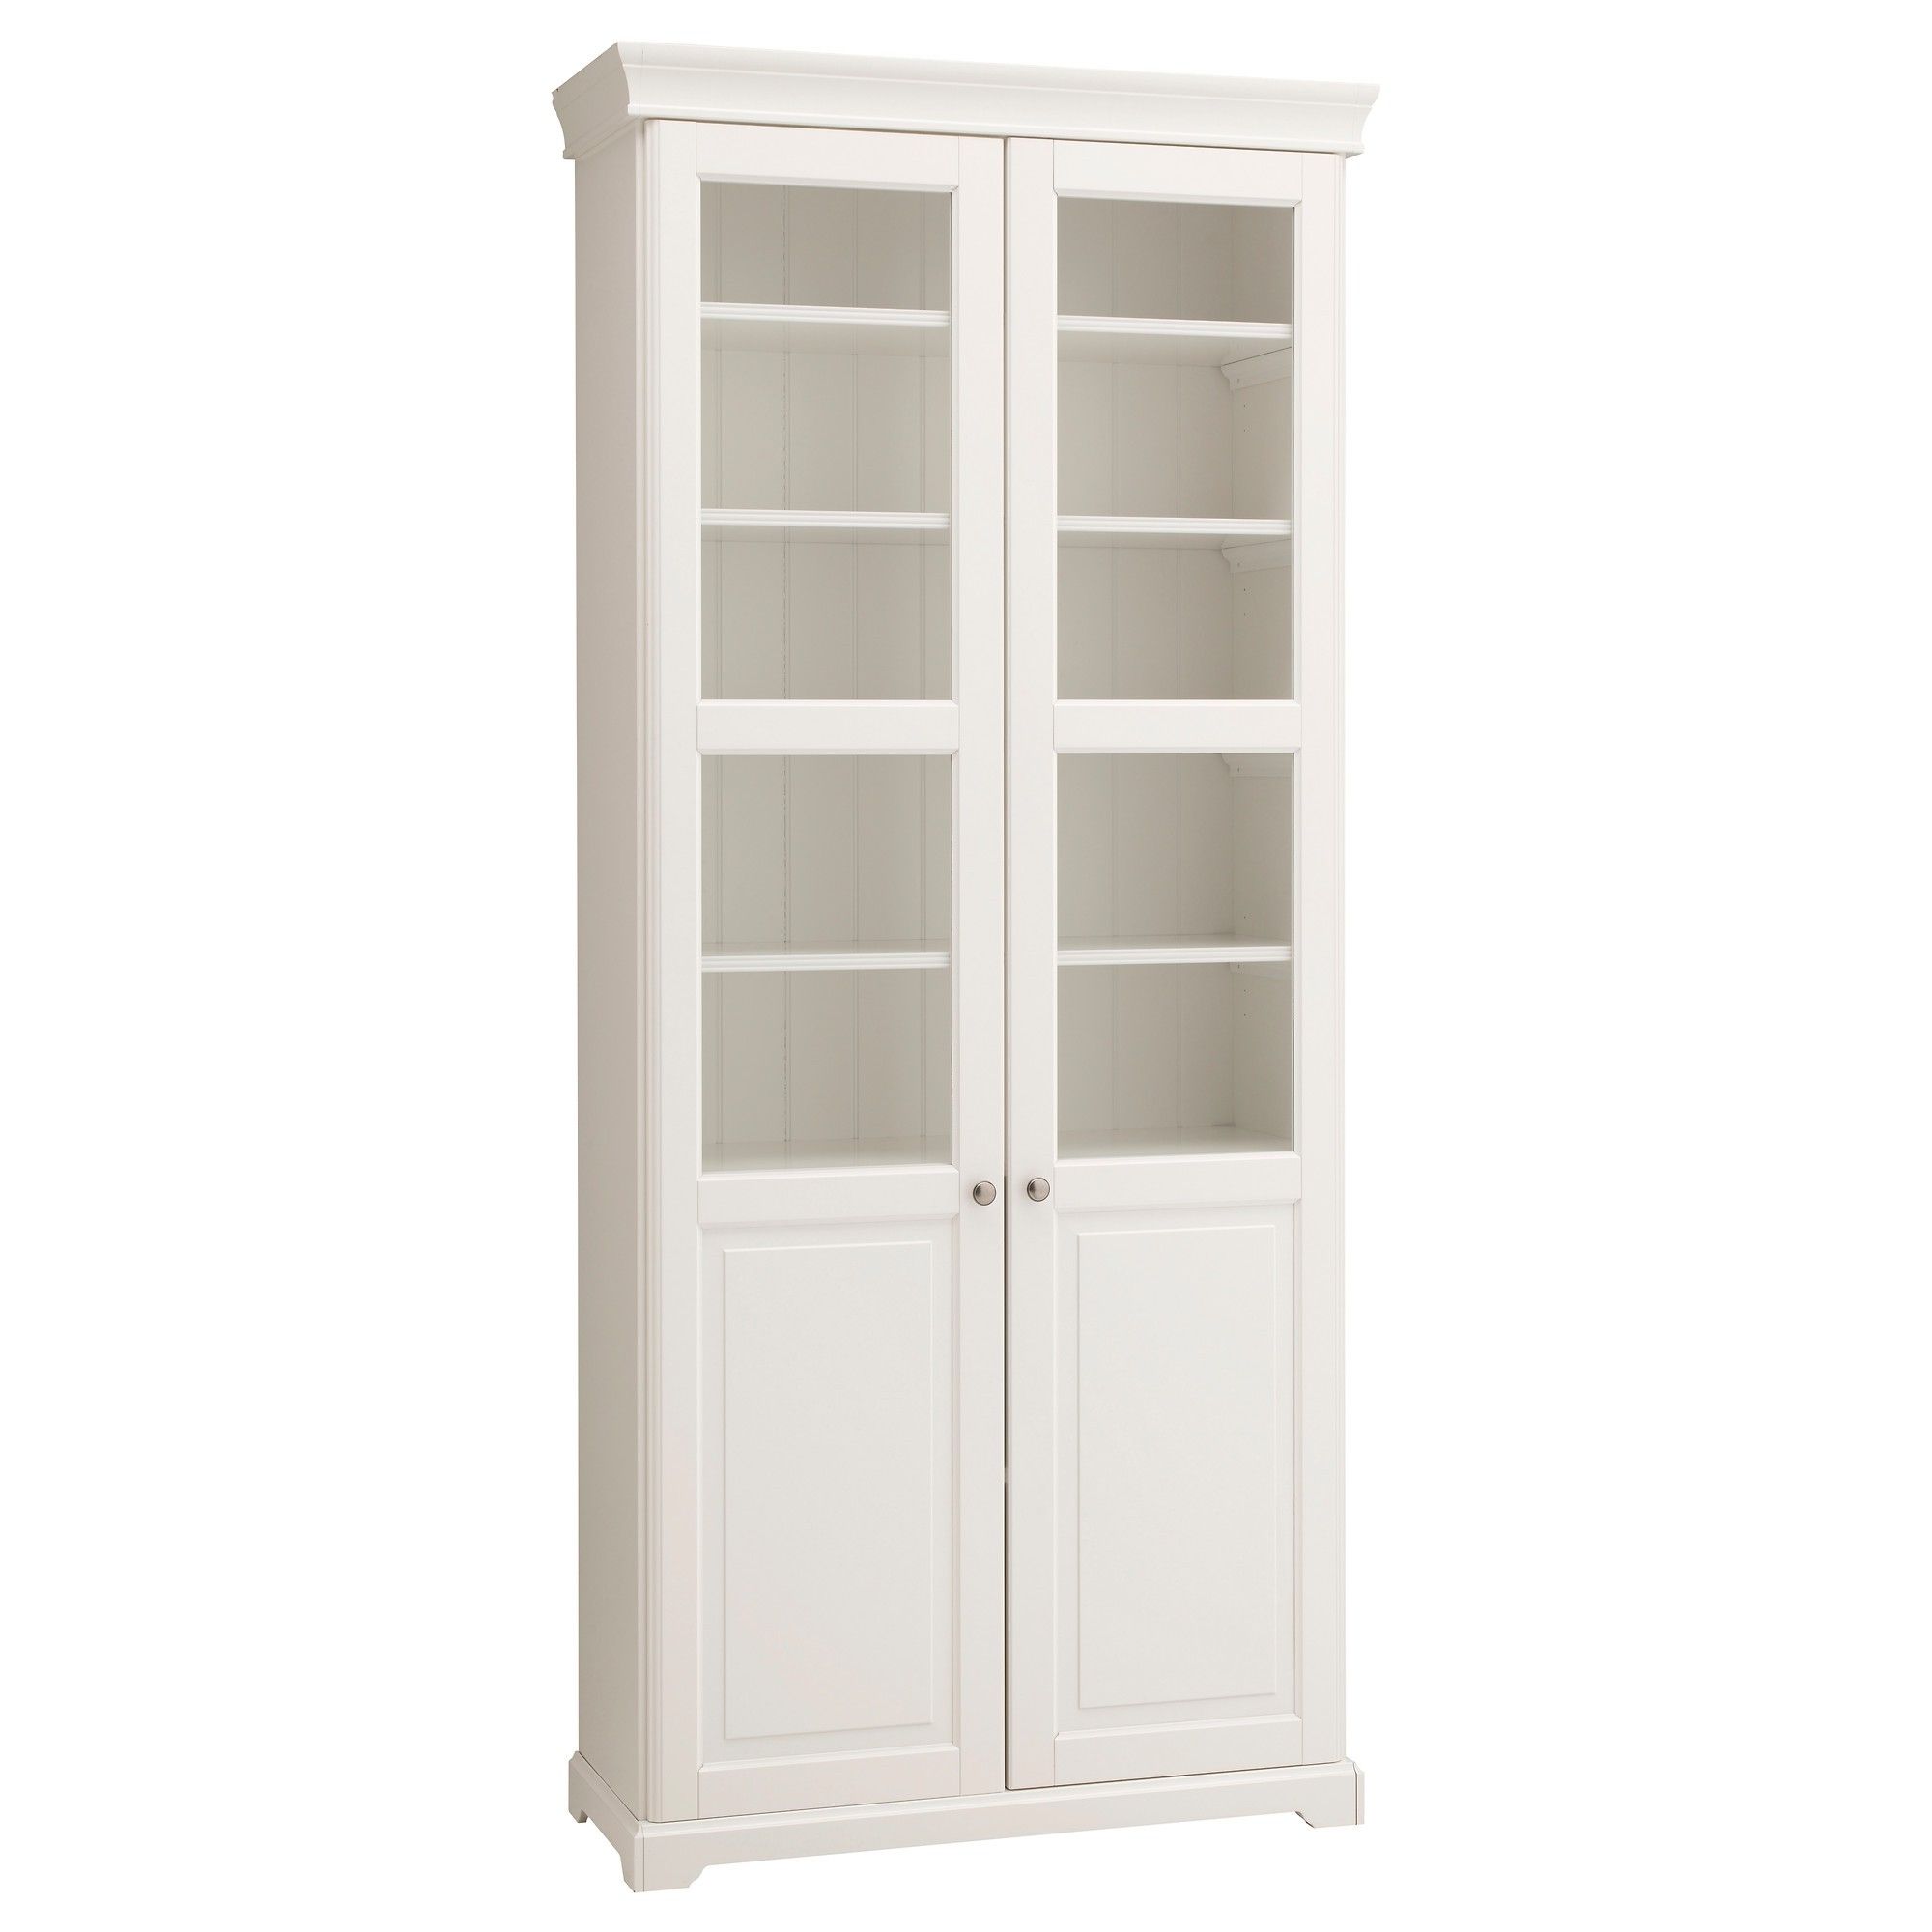 White Wood Bookcase With Doors Tall Stained Oak Cabinet Glass As Intended For Popular Tall Bookcases With Doors (View 3 of 15)